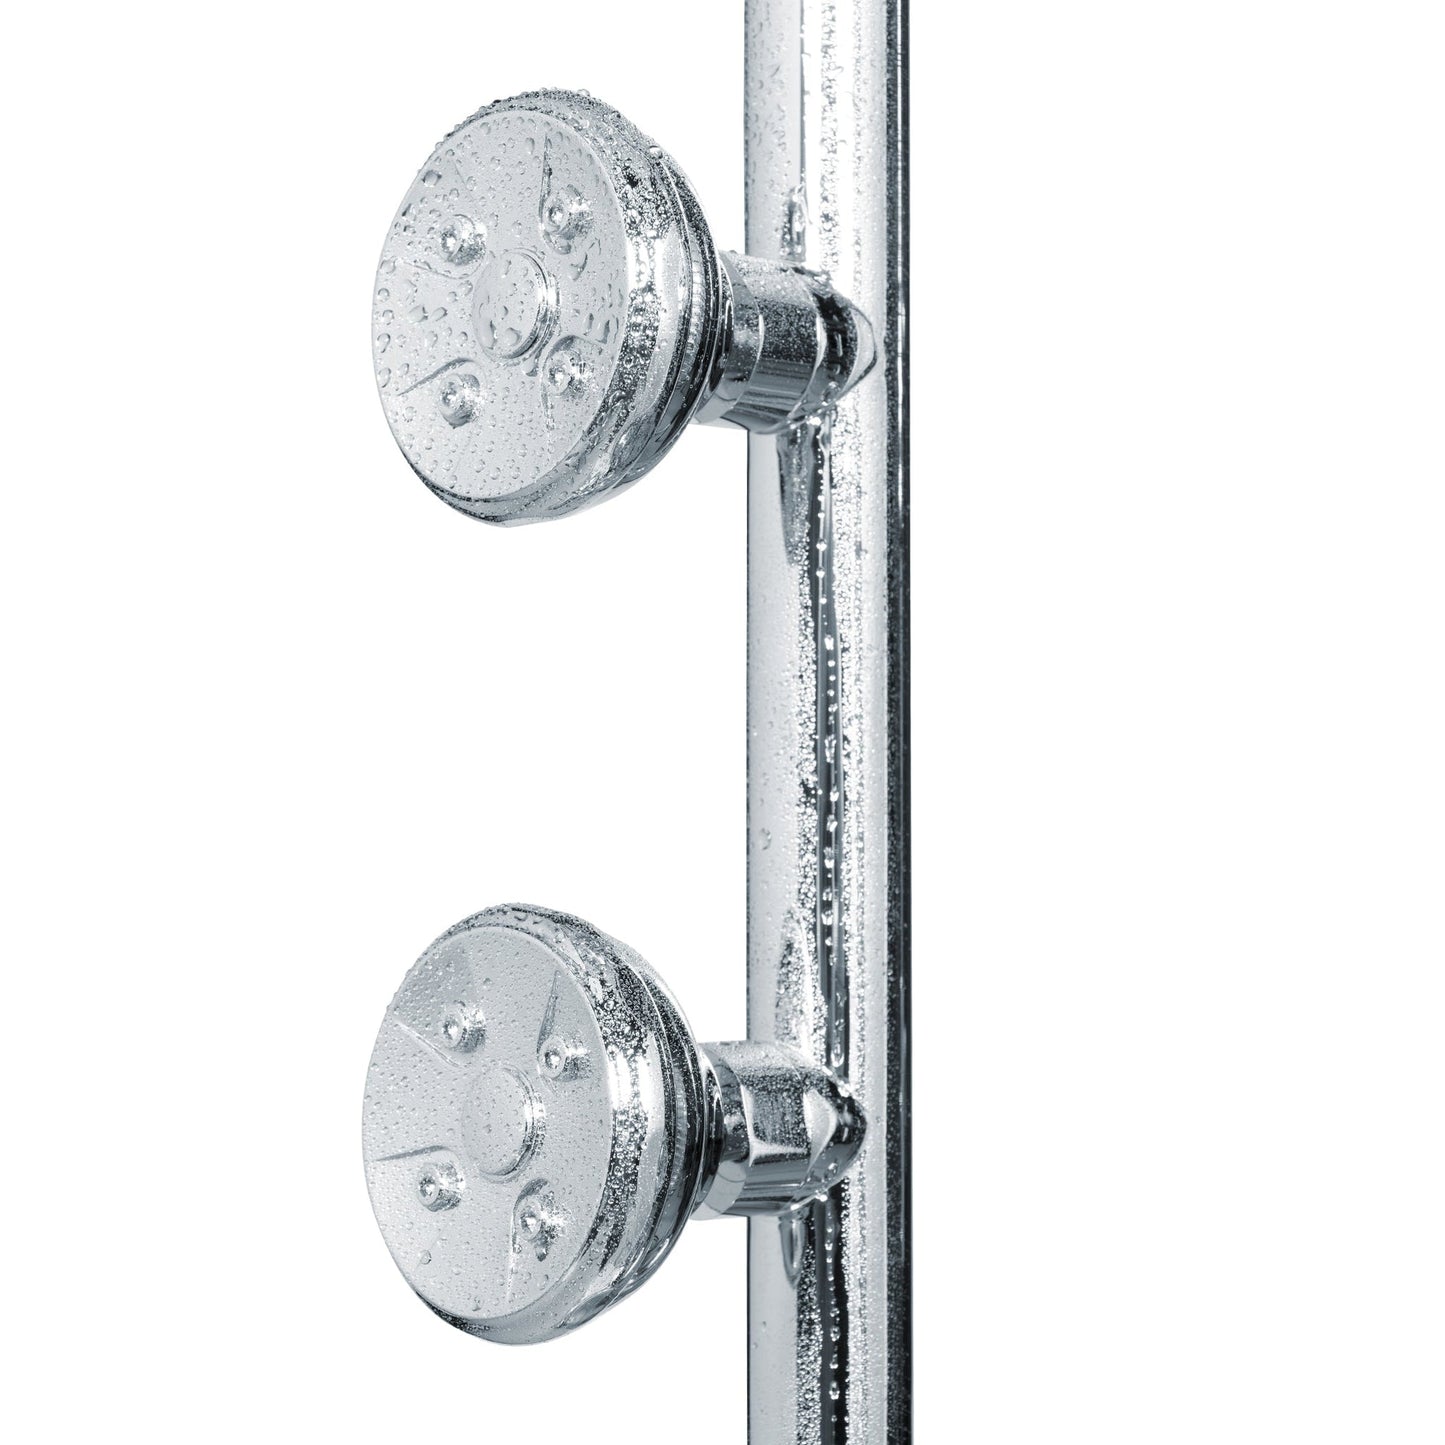 PULSE ShowerSpas Lanai 1.8 GPM Rain Shower System in Chrome Finish With 3-Power Spray Body Jet and 3-Function Hand Shower